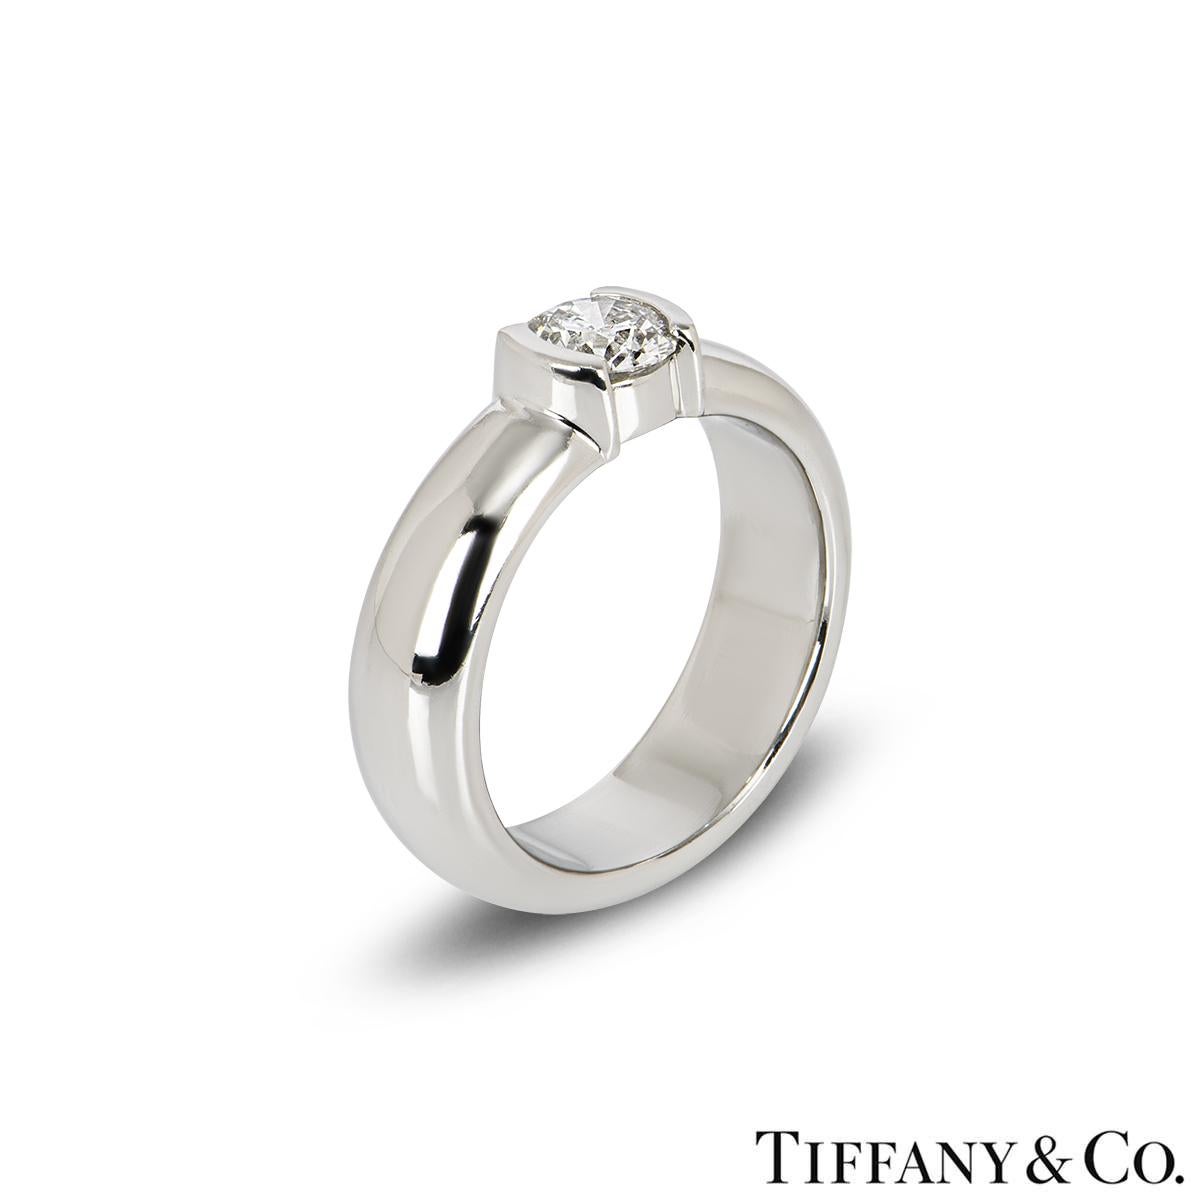 A beautiful platinum Tiffany & Co. diamond ring from the Etoile collection. The ring is set to the centre with a 0.50ct round brilliant cut diamond, F colour and VS1 in clarity, set in a raised open tension setting. The 5mm ring has a gross weight